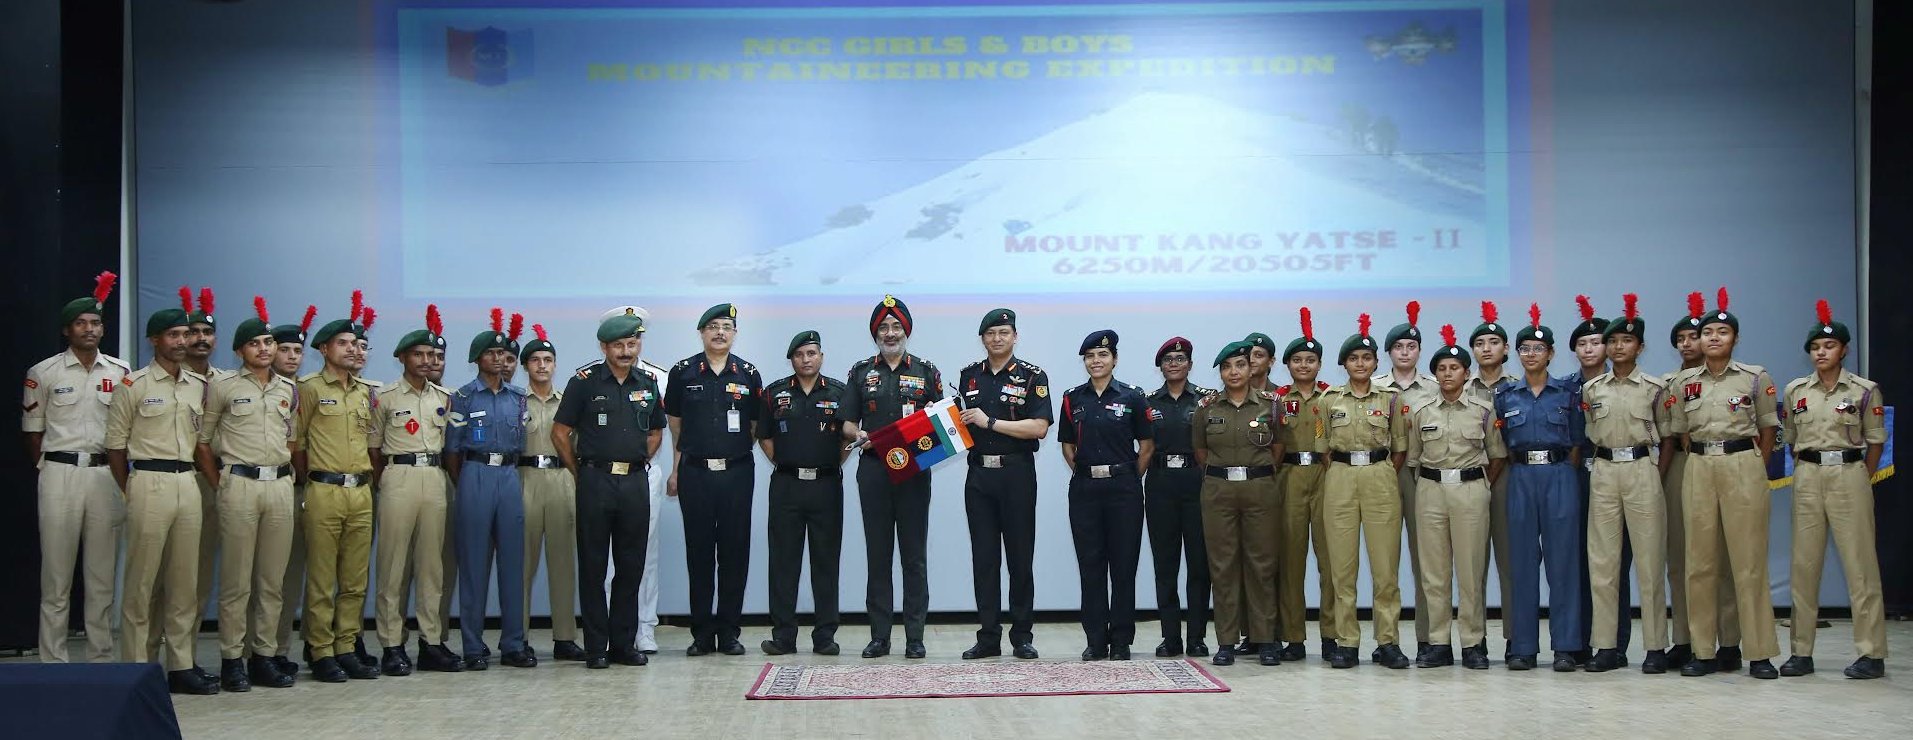 NCC Expedition to Mount Kang Yatse-II Flagged Off by DG Lt Gen Gurbirpal Singh